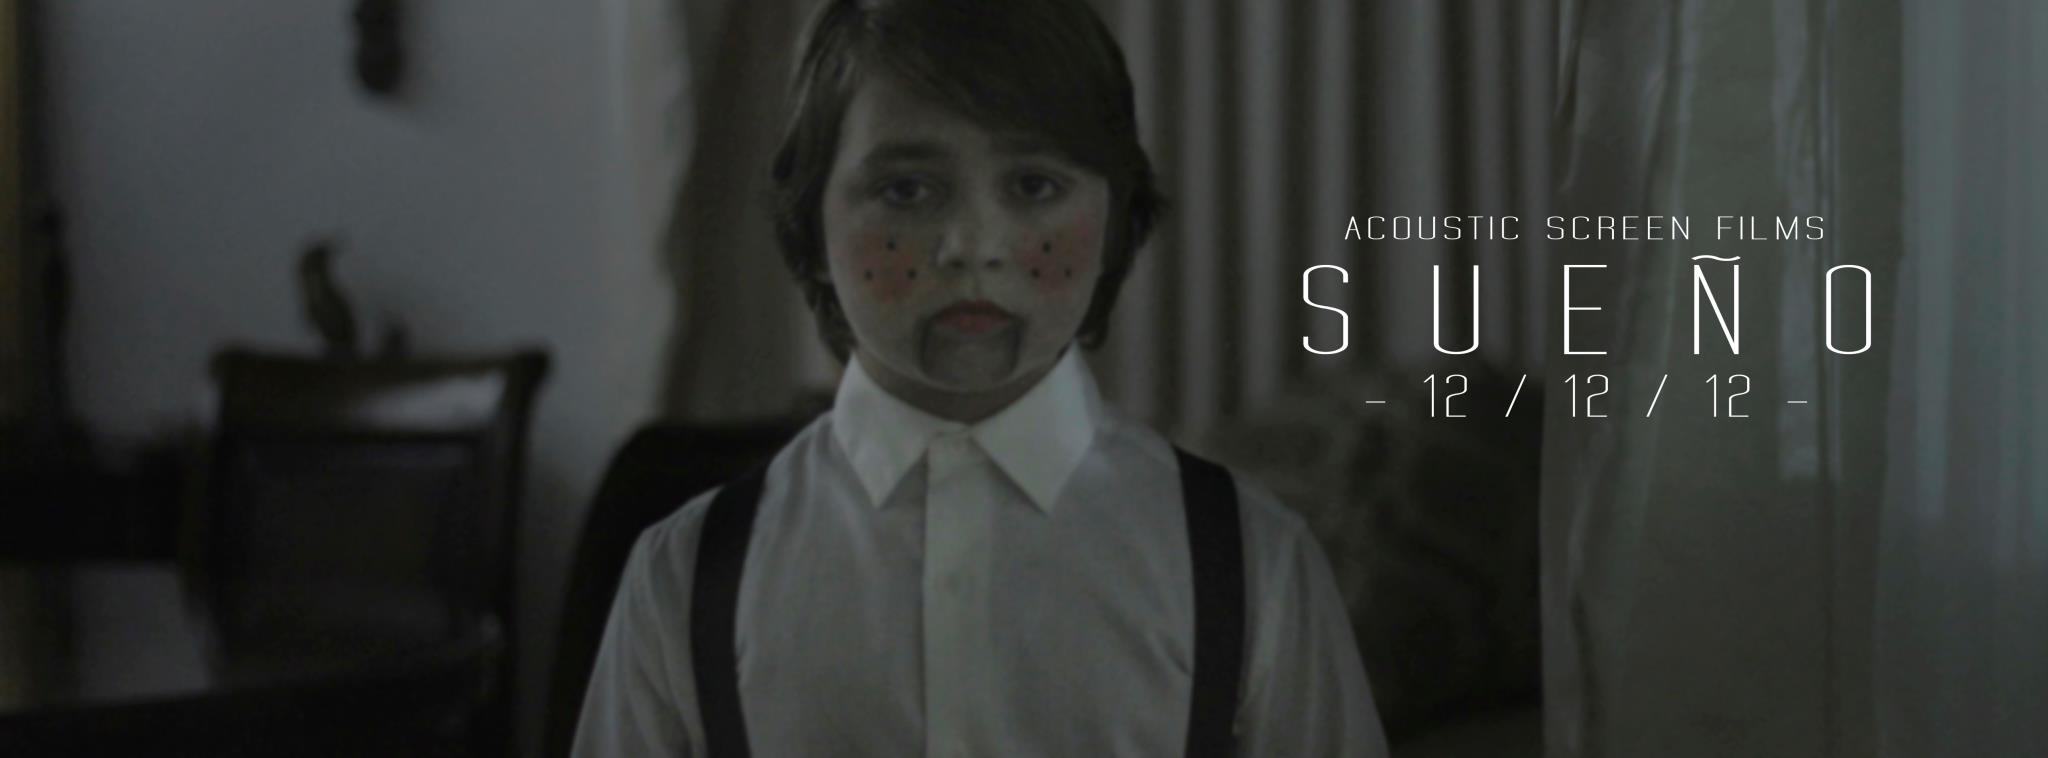 Poster for the Short 